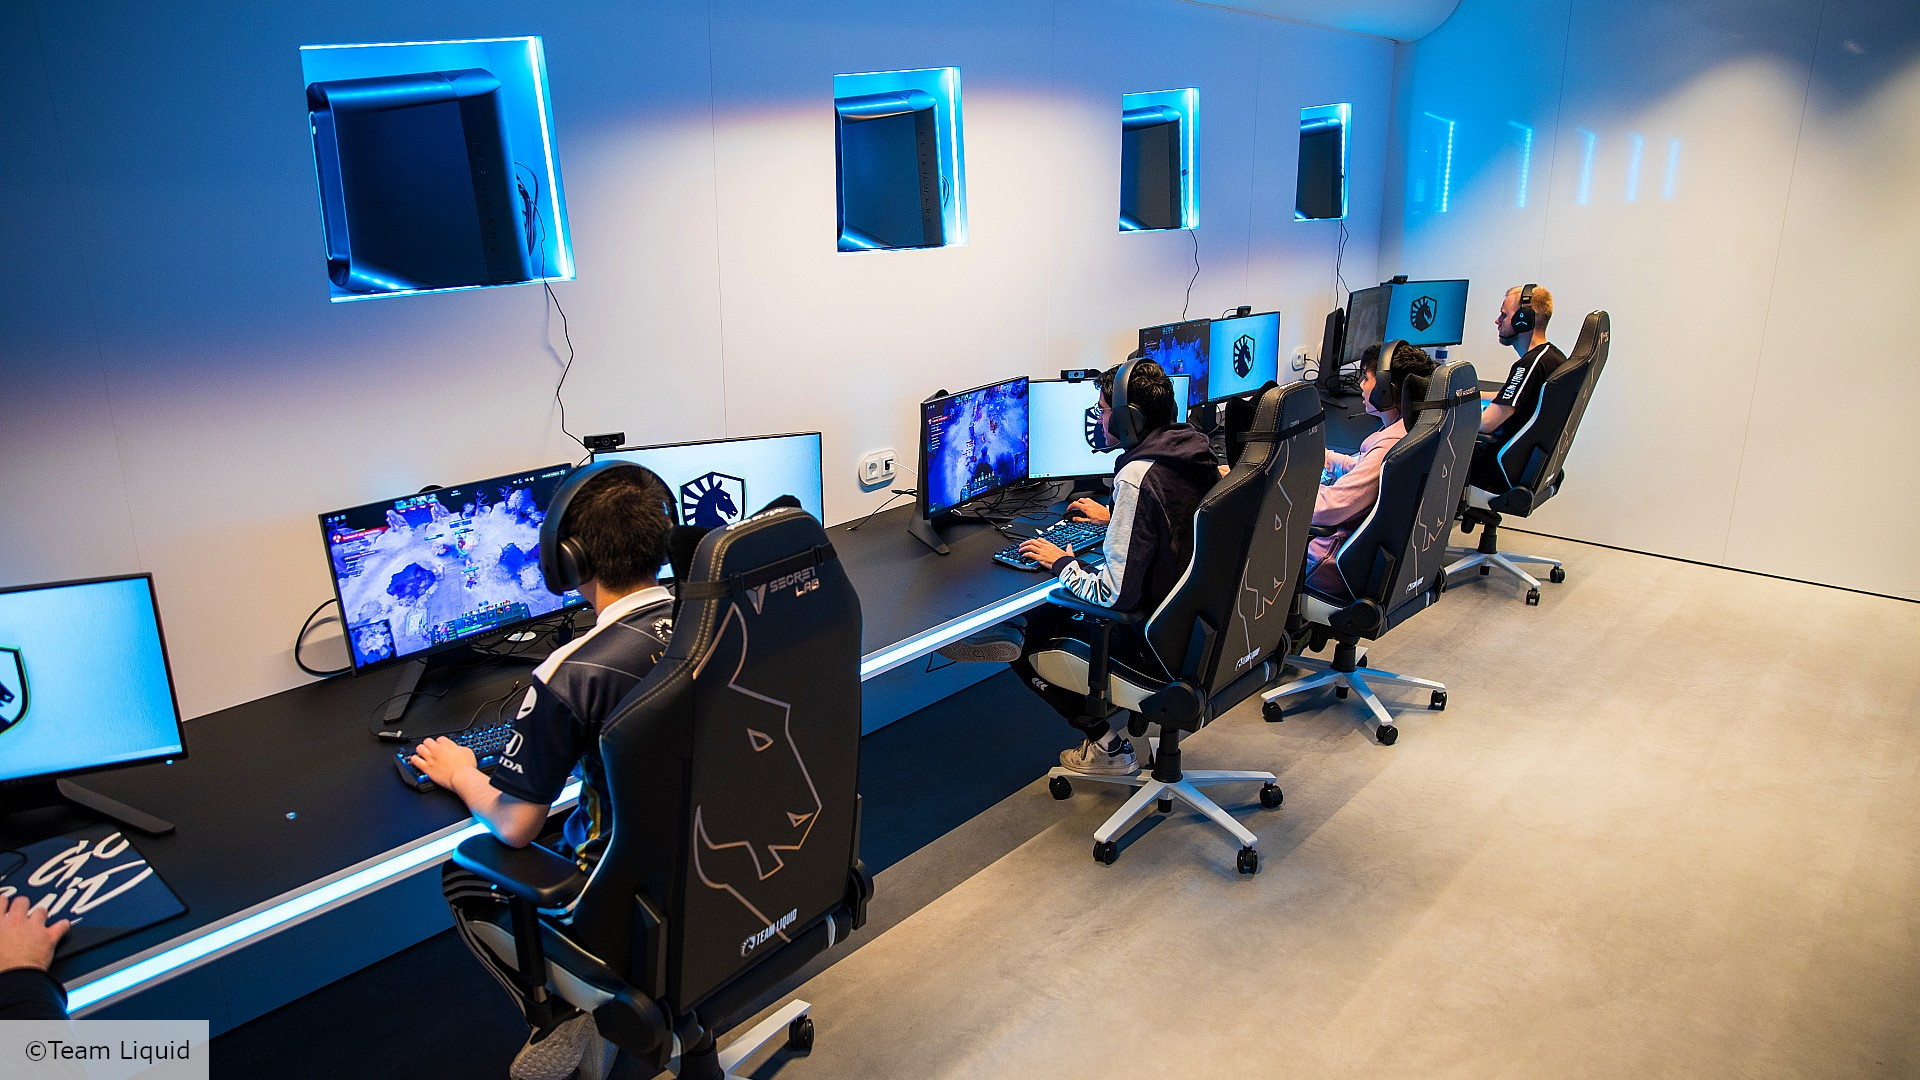 Team Liquid’s new facility is a show of faith in its European players